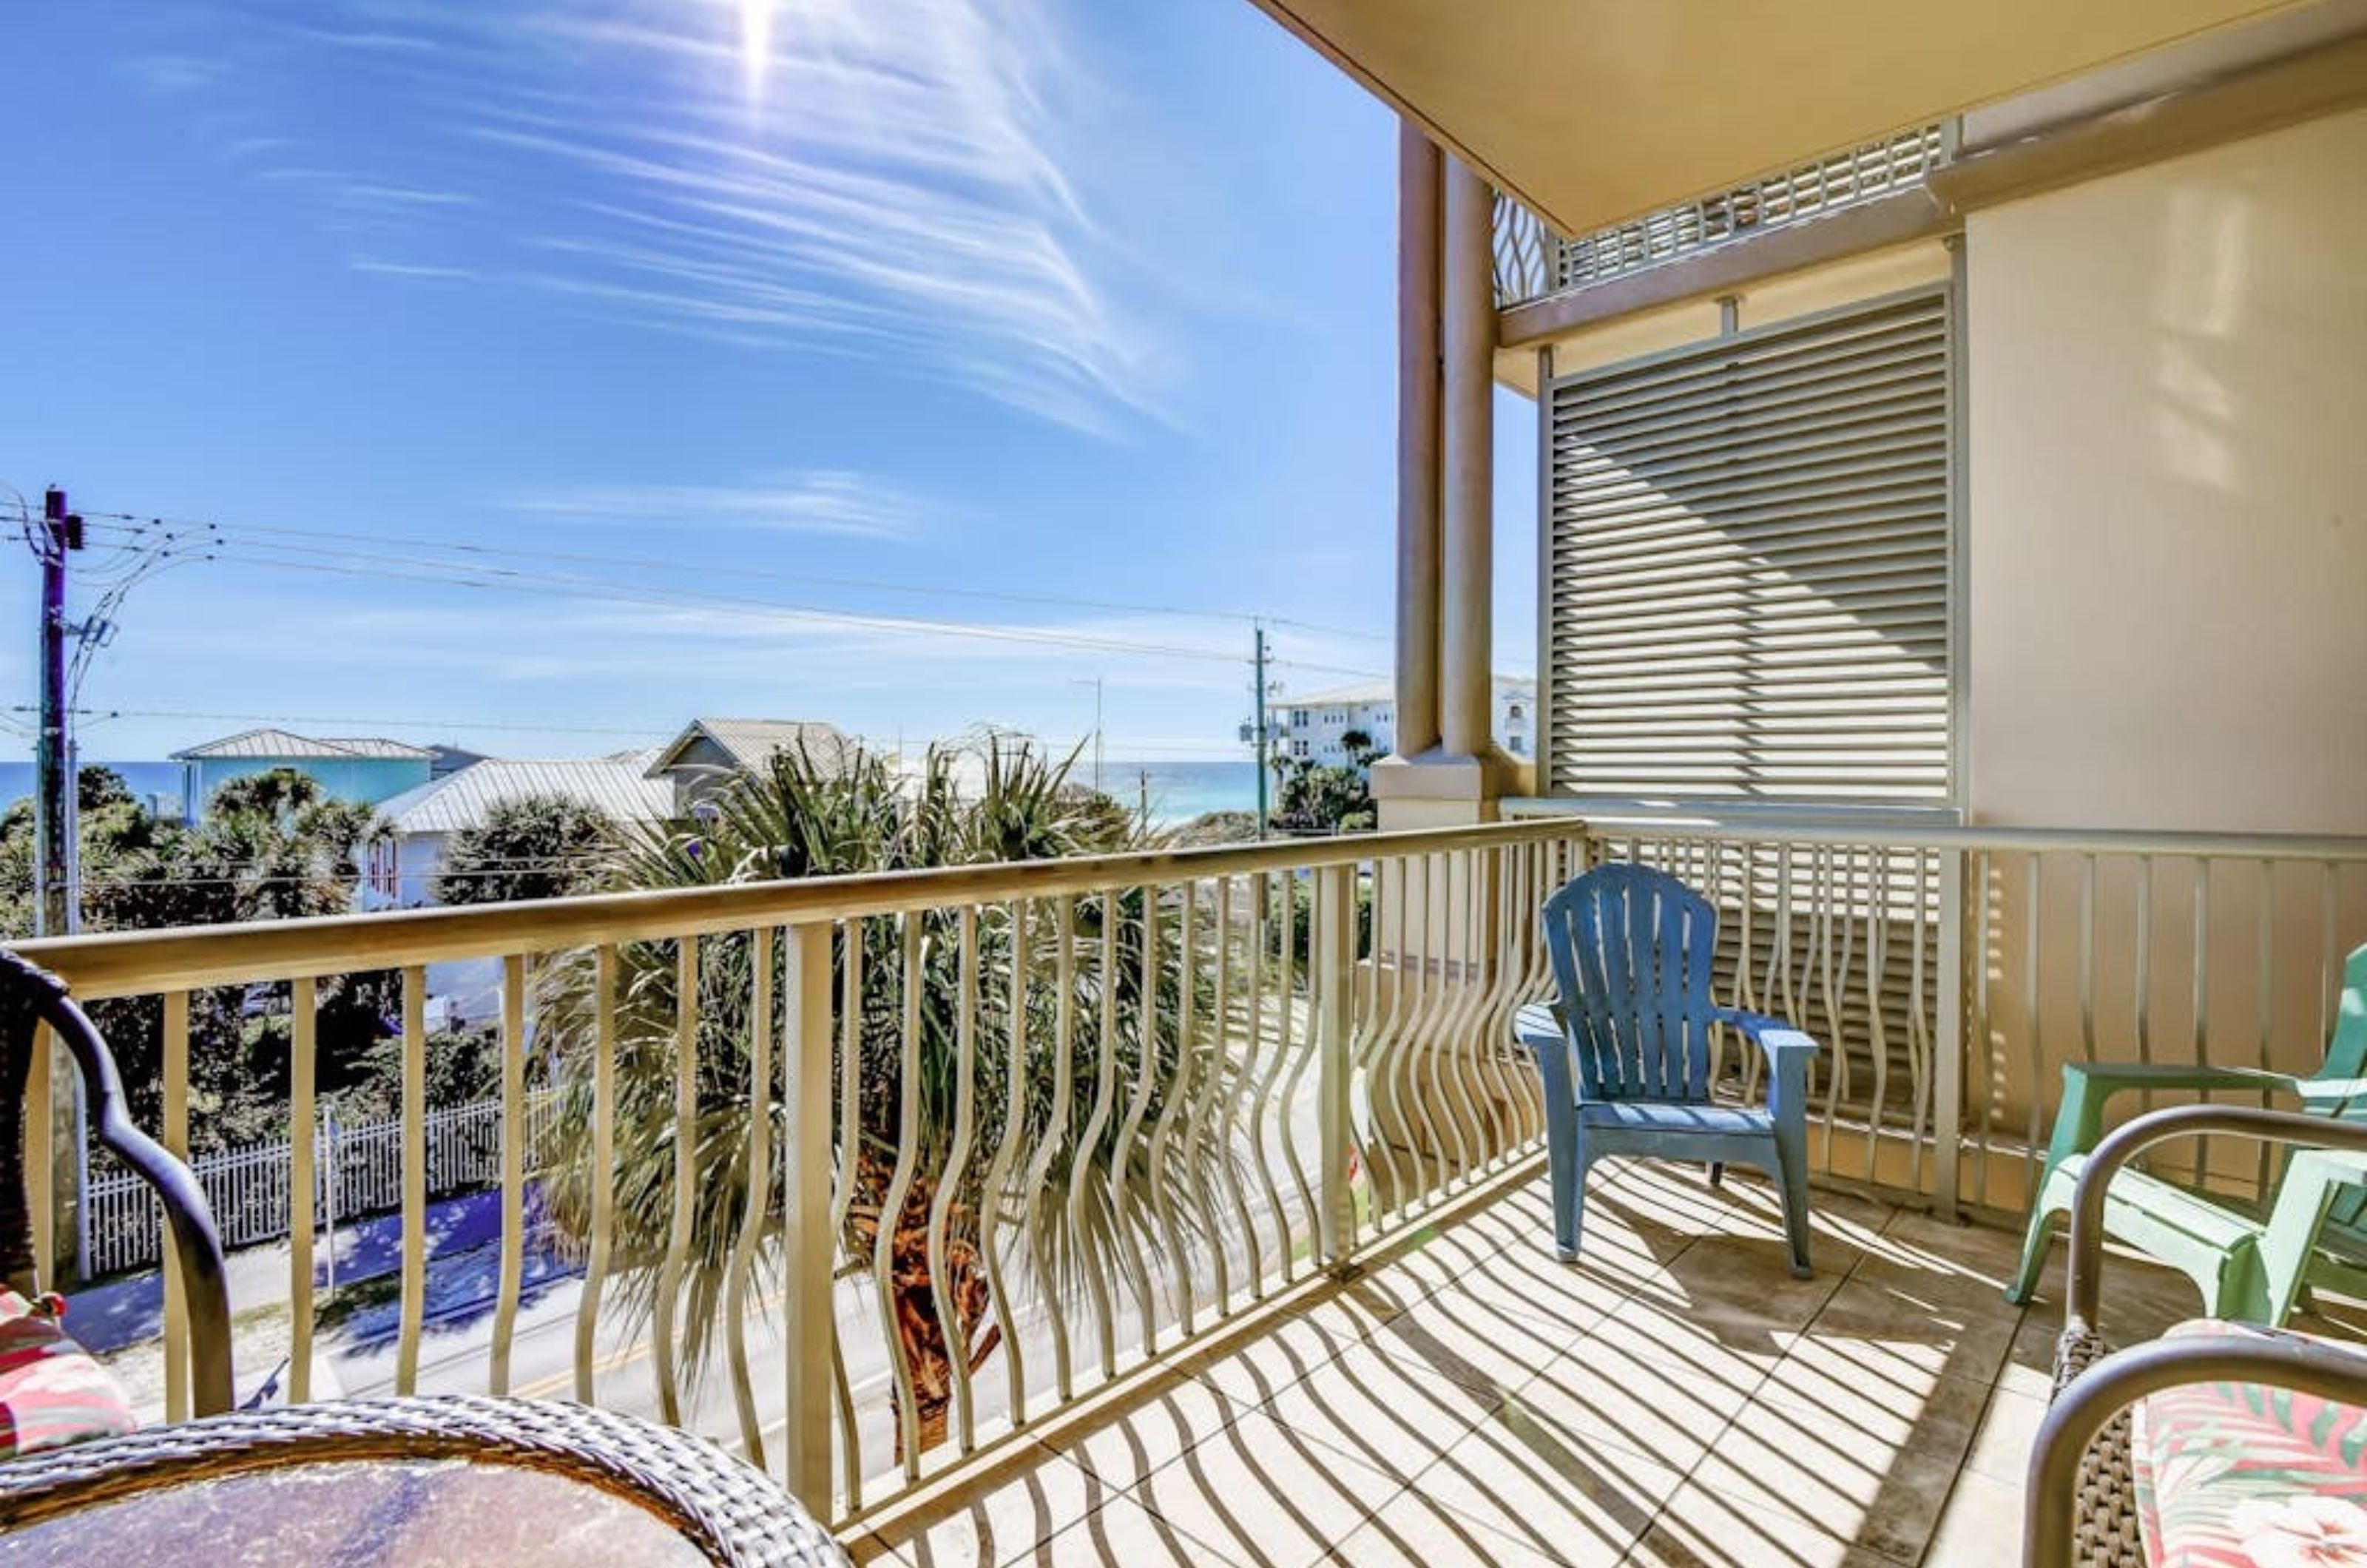 A private balcony at Abacos with lounge chairs 